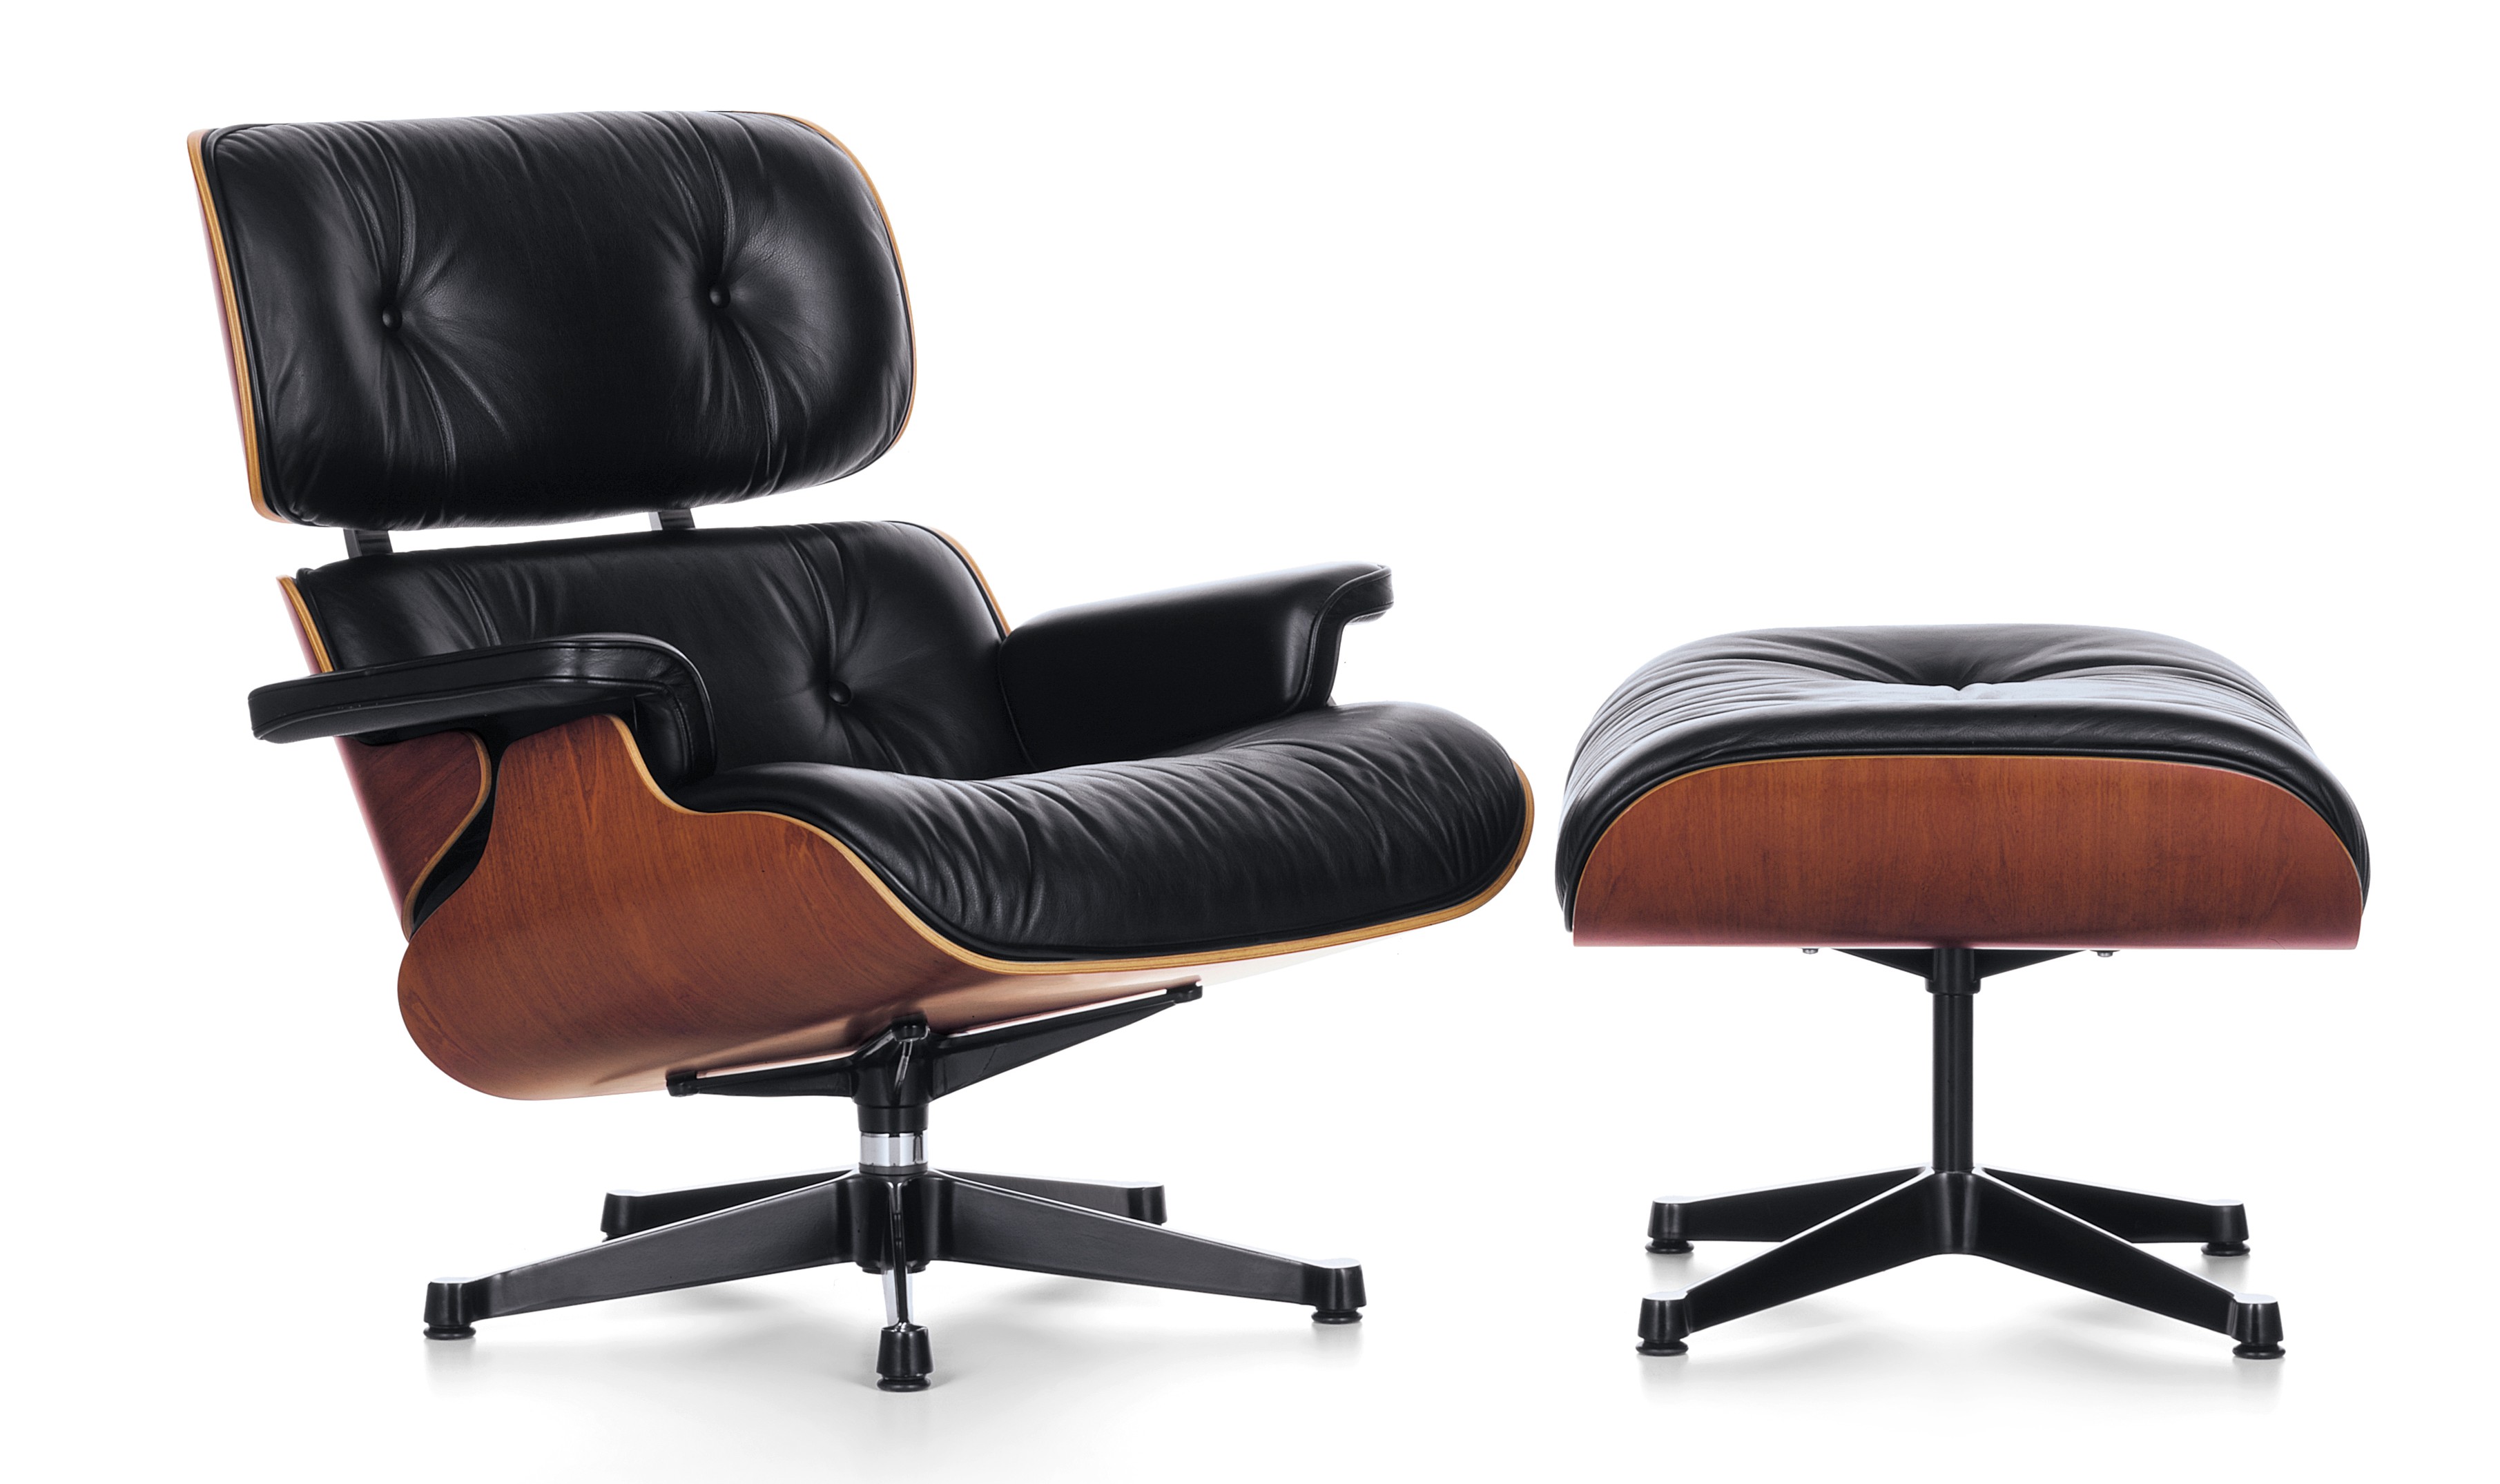 Eames lounge chair fra Vitra